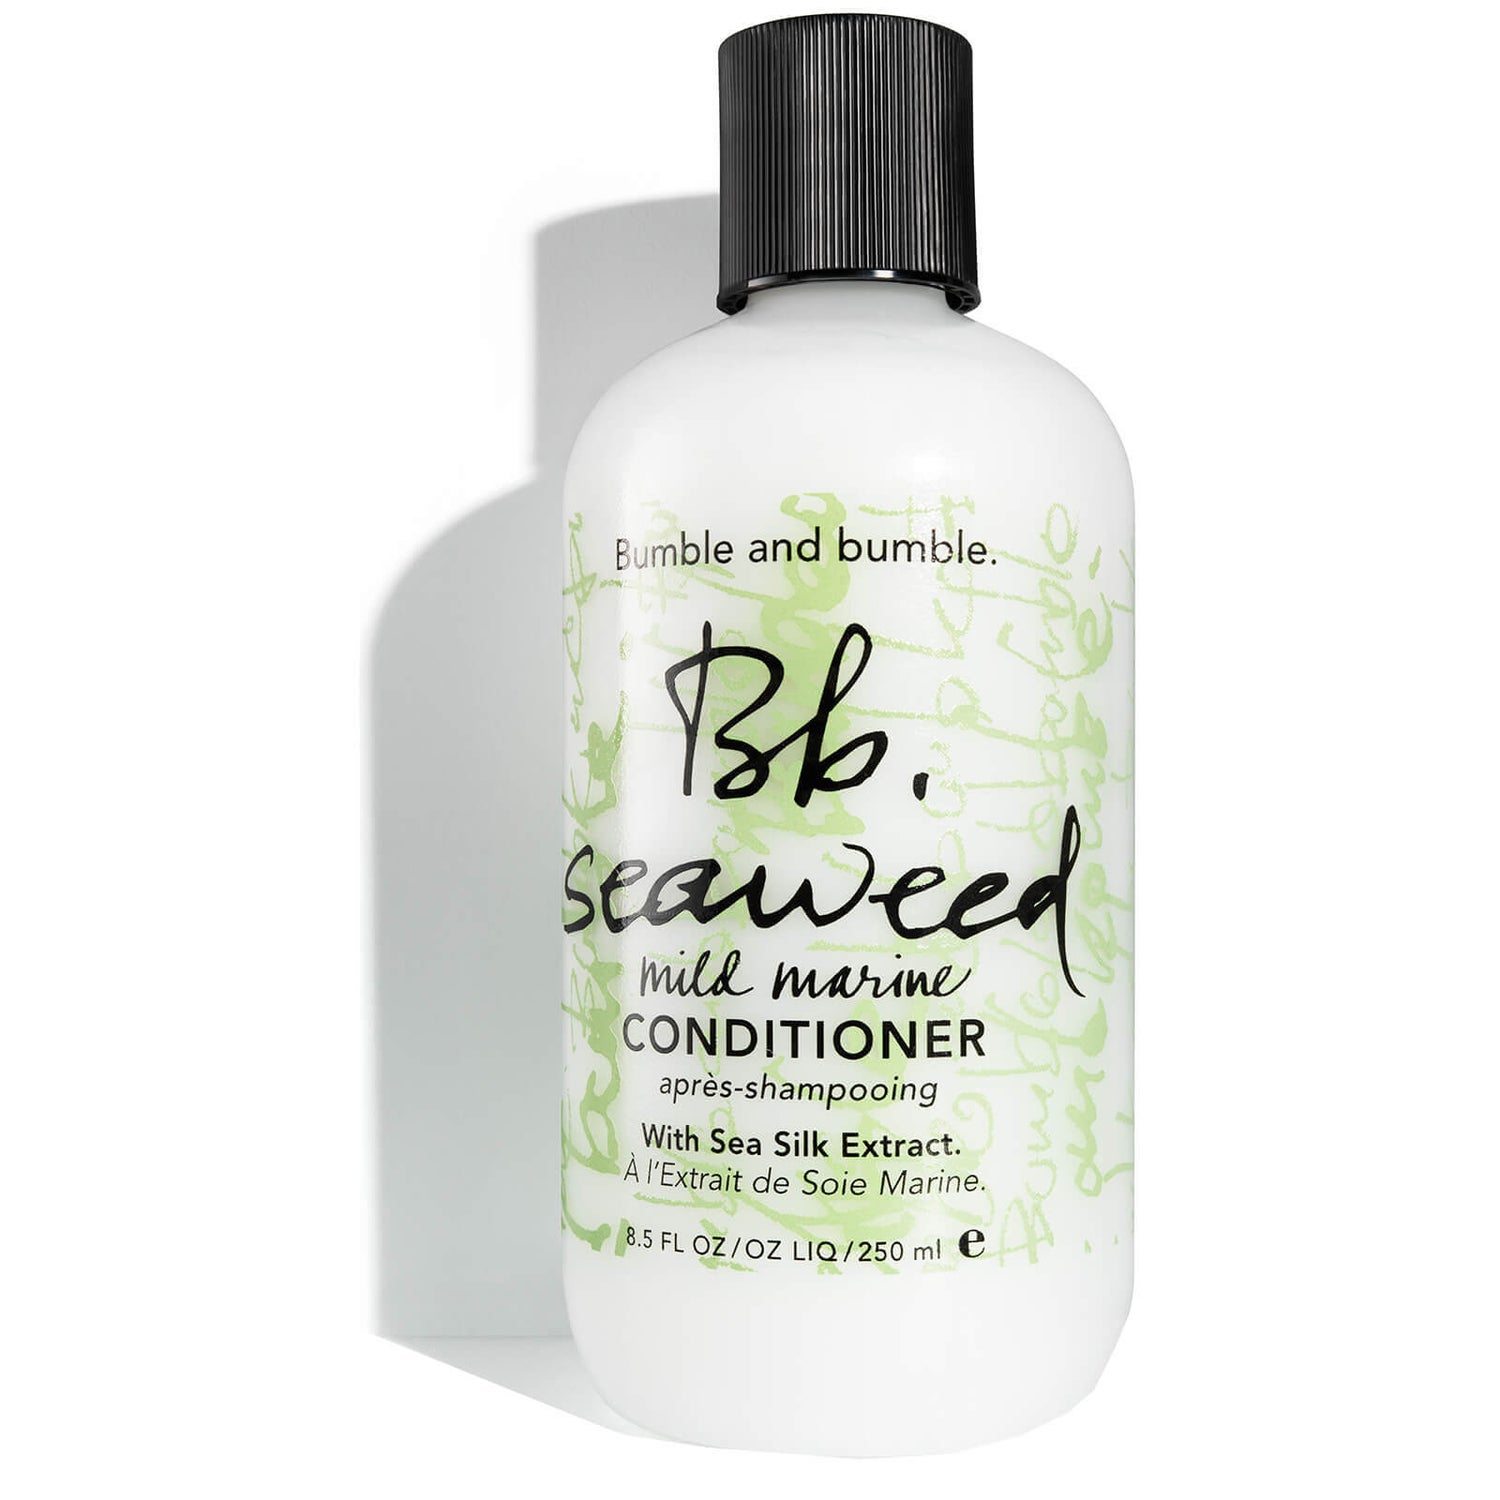 Bumble and bumble Seaweed Conditioner 250 ml